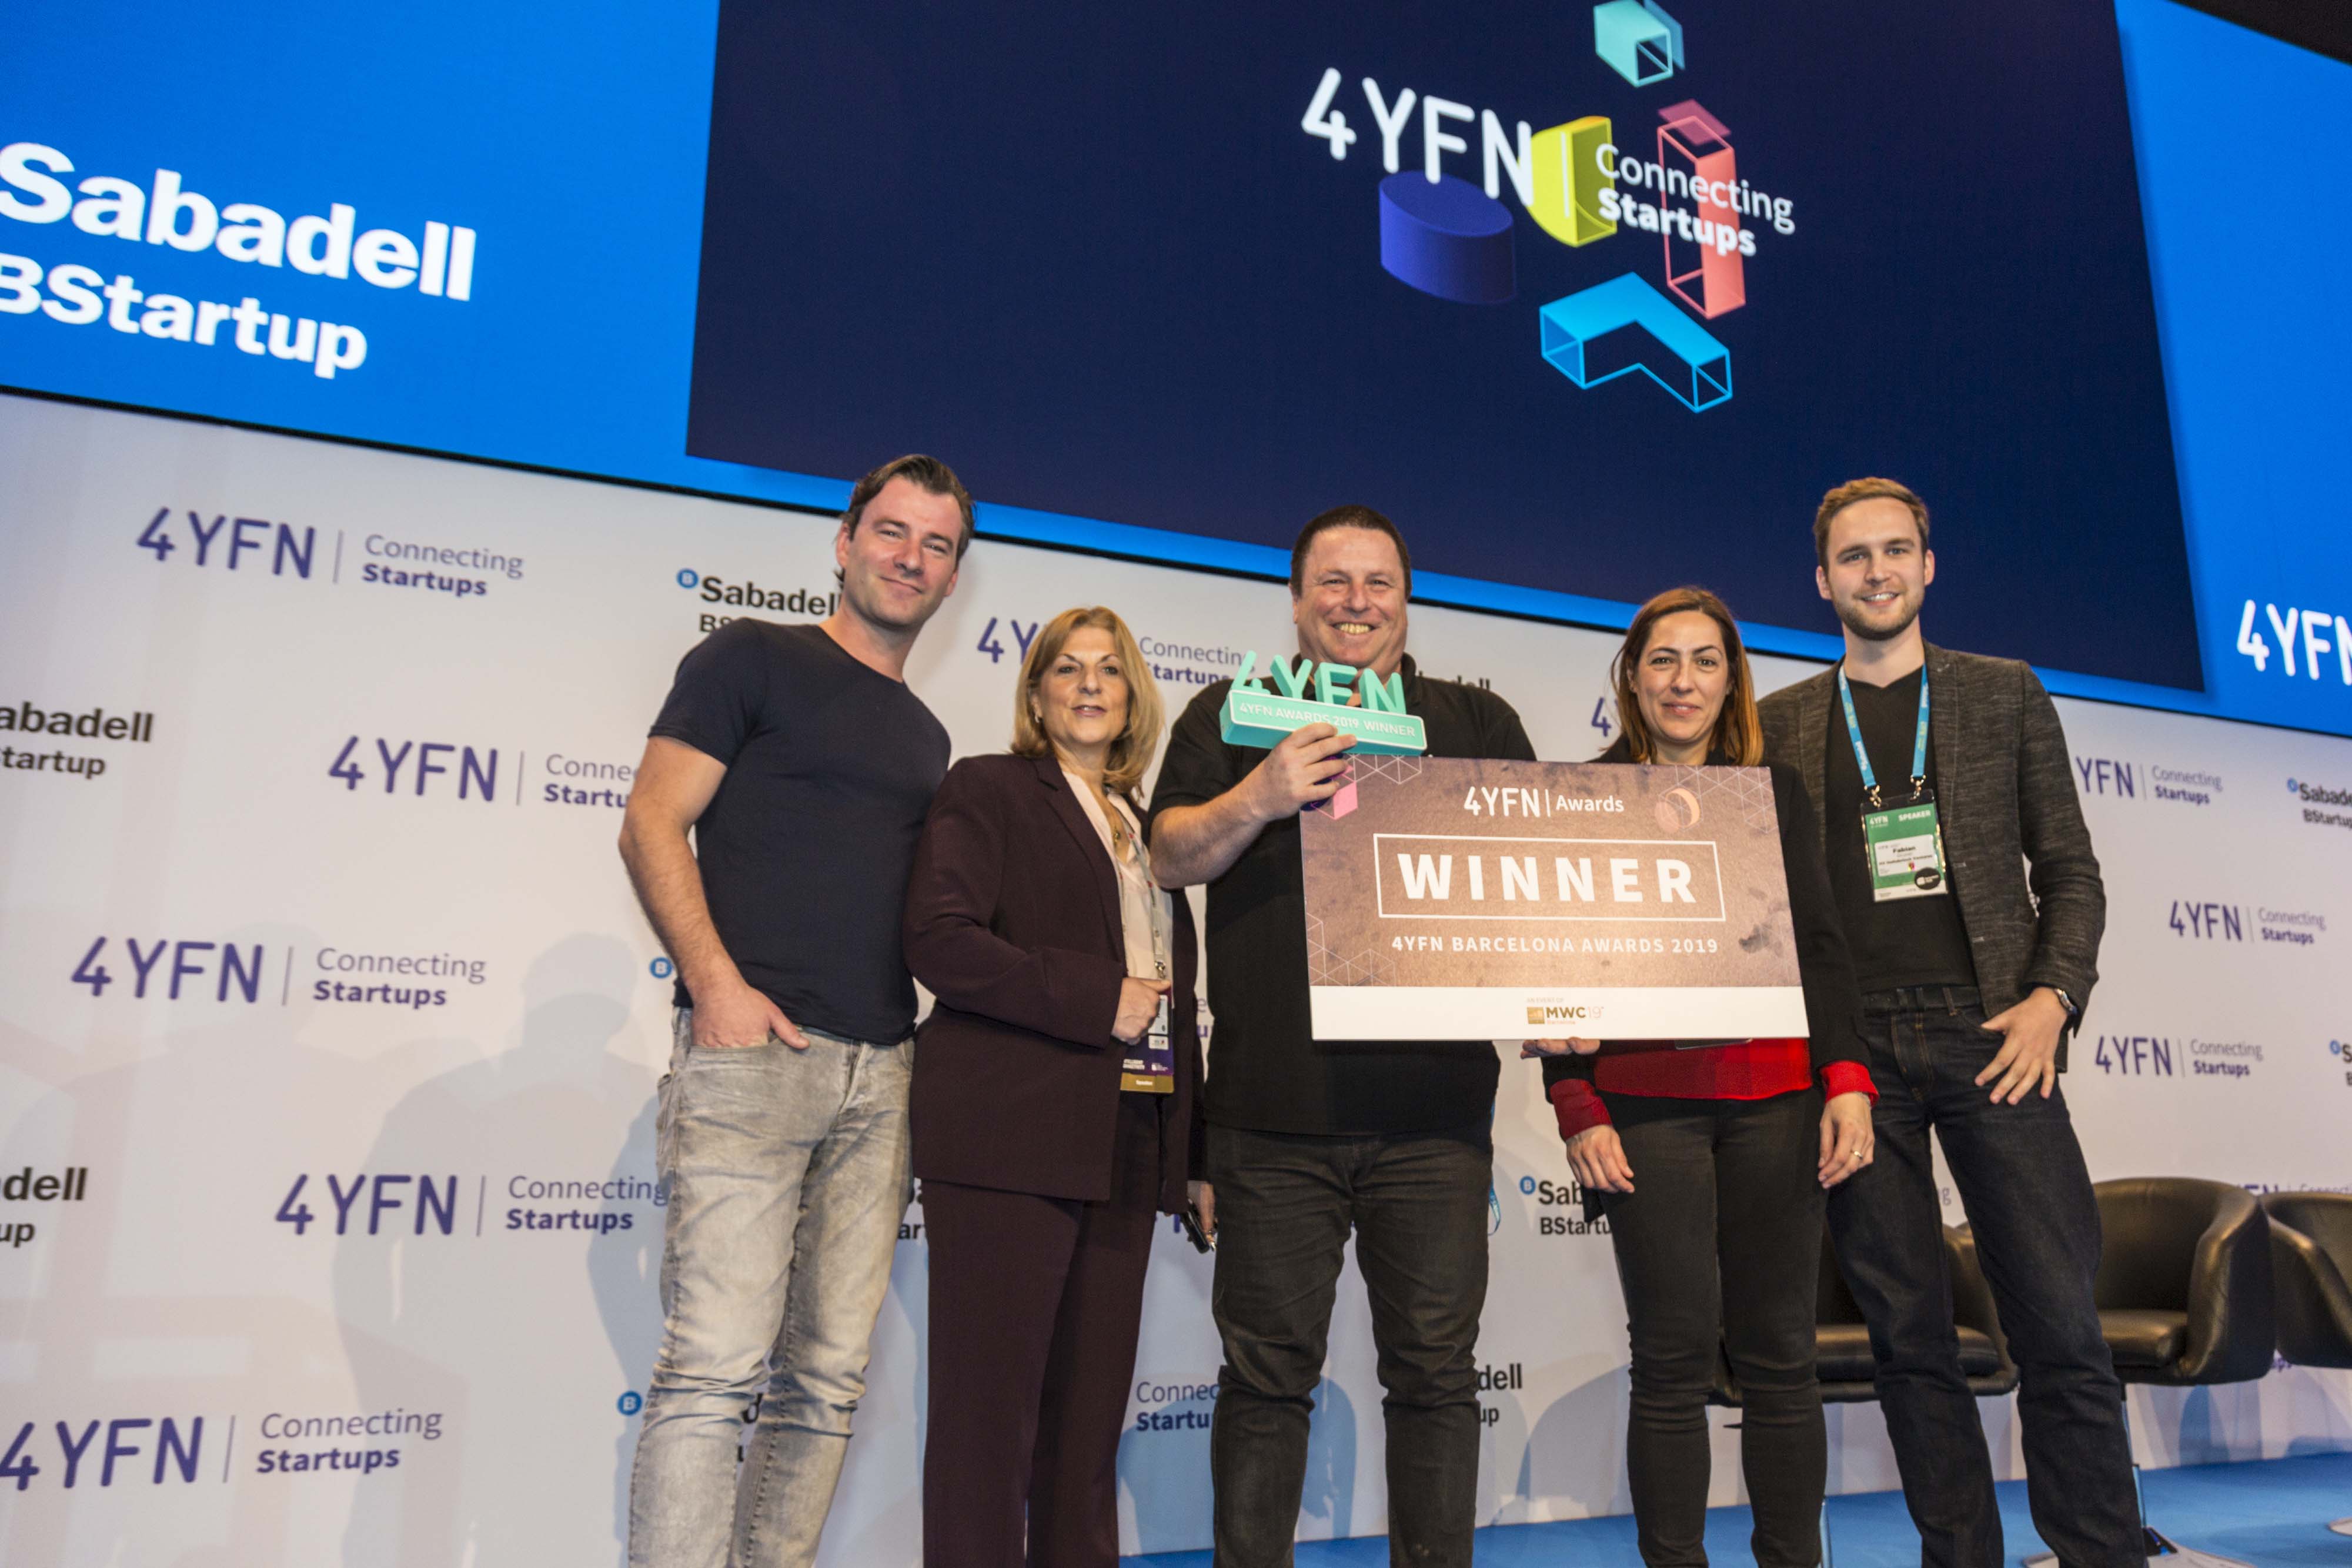 jammer gun purchases crossword | IoT Device Security Startup NanoLock Wins GSMA’s 4YFN Competition